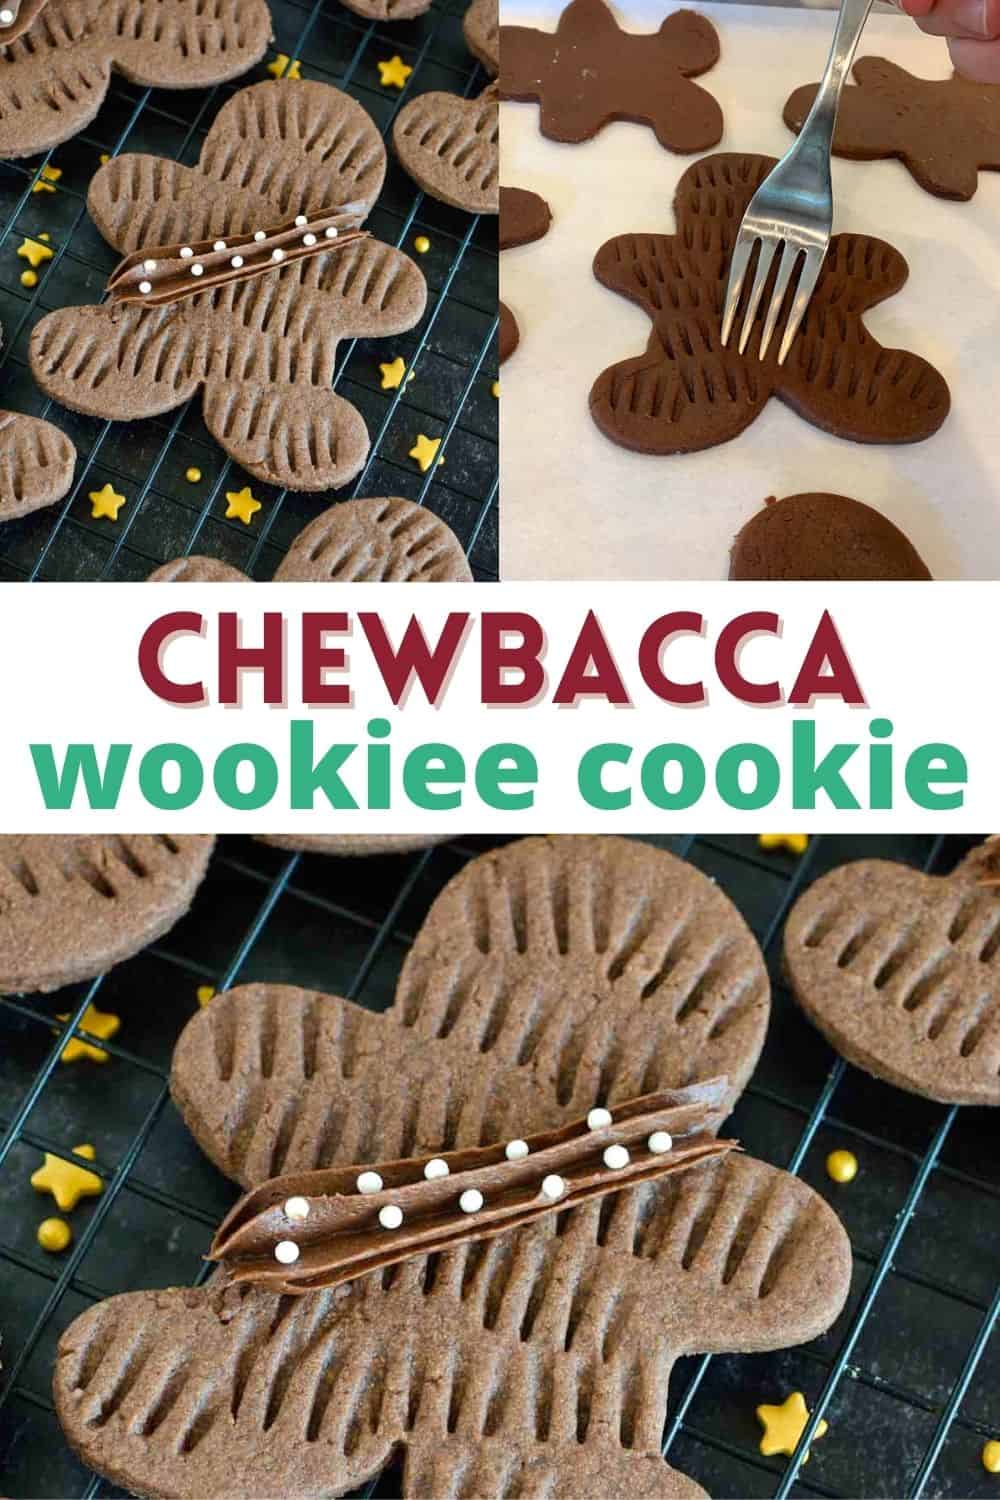 These Wookie Cookies are made with an easy chocolate sugar cookie recipe and a gingerbread man cookie cutter. Press fork tongs into the dough for the simple wookiee fur. May the 4th be with you as you enjoy these Chewbacca cookies for Star Wars day!